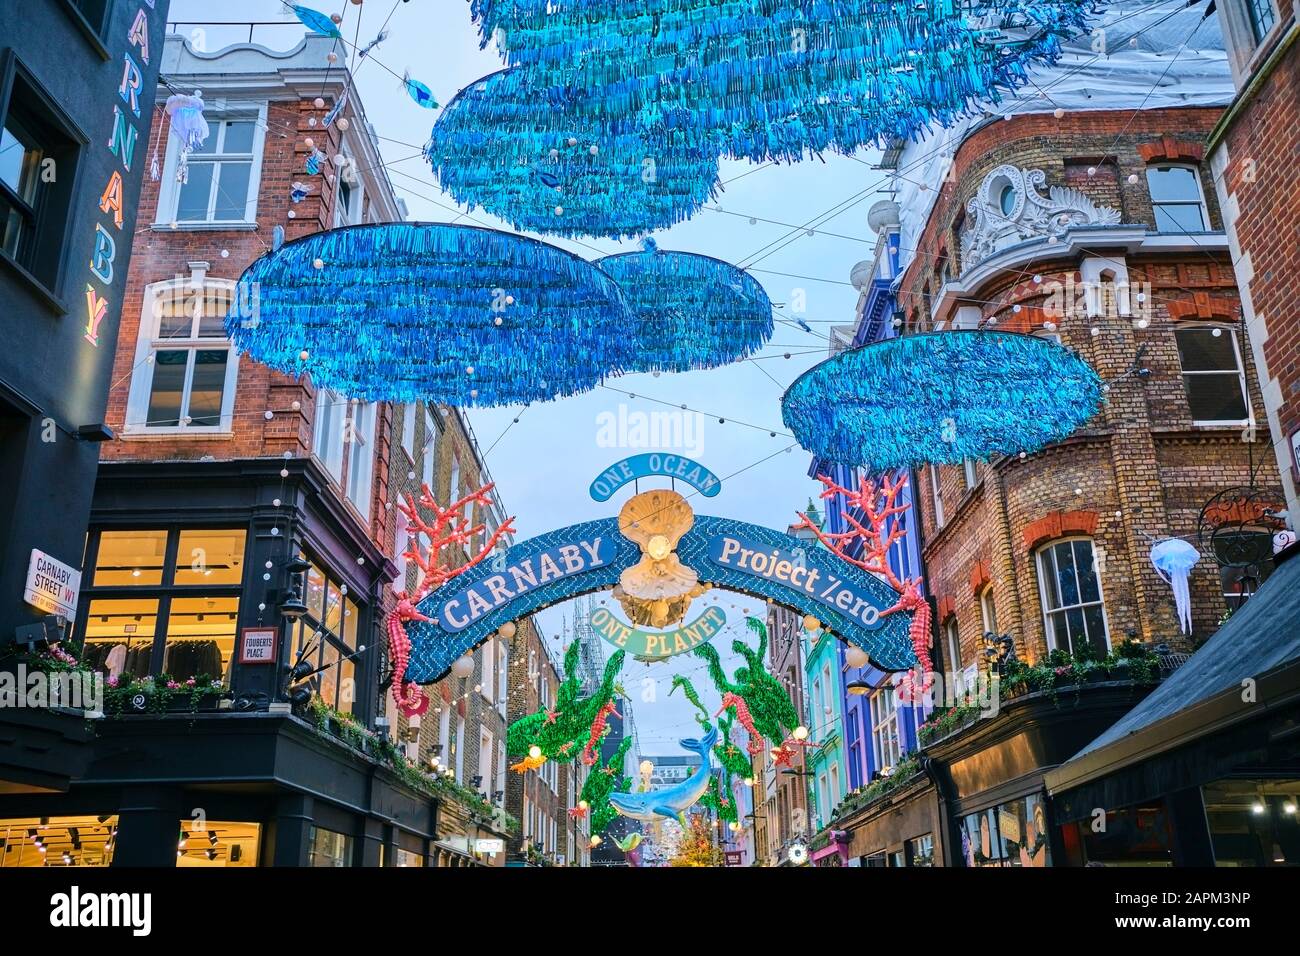 UK, England, London, Sealife decorations hanging over Carnaby Street during ocean conservation charity event Stock Photo